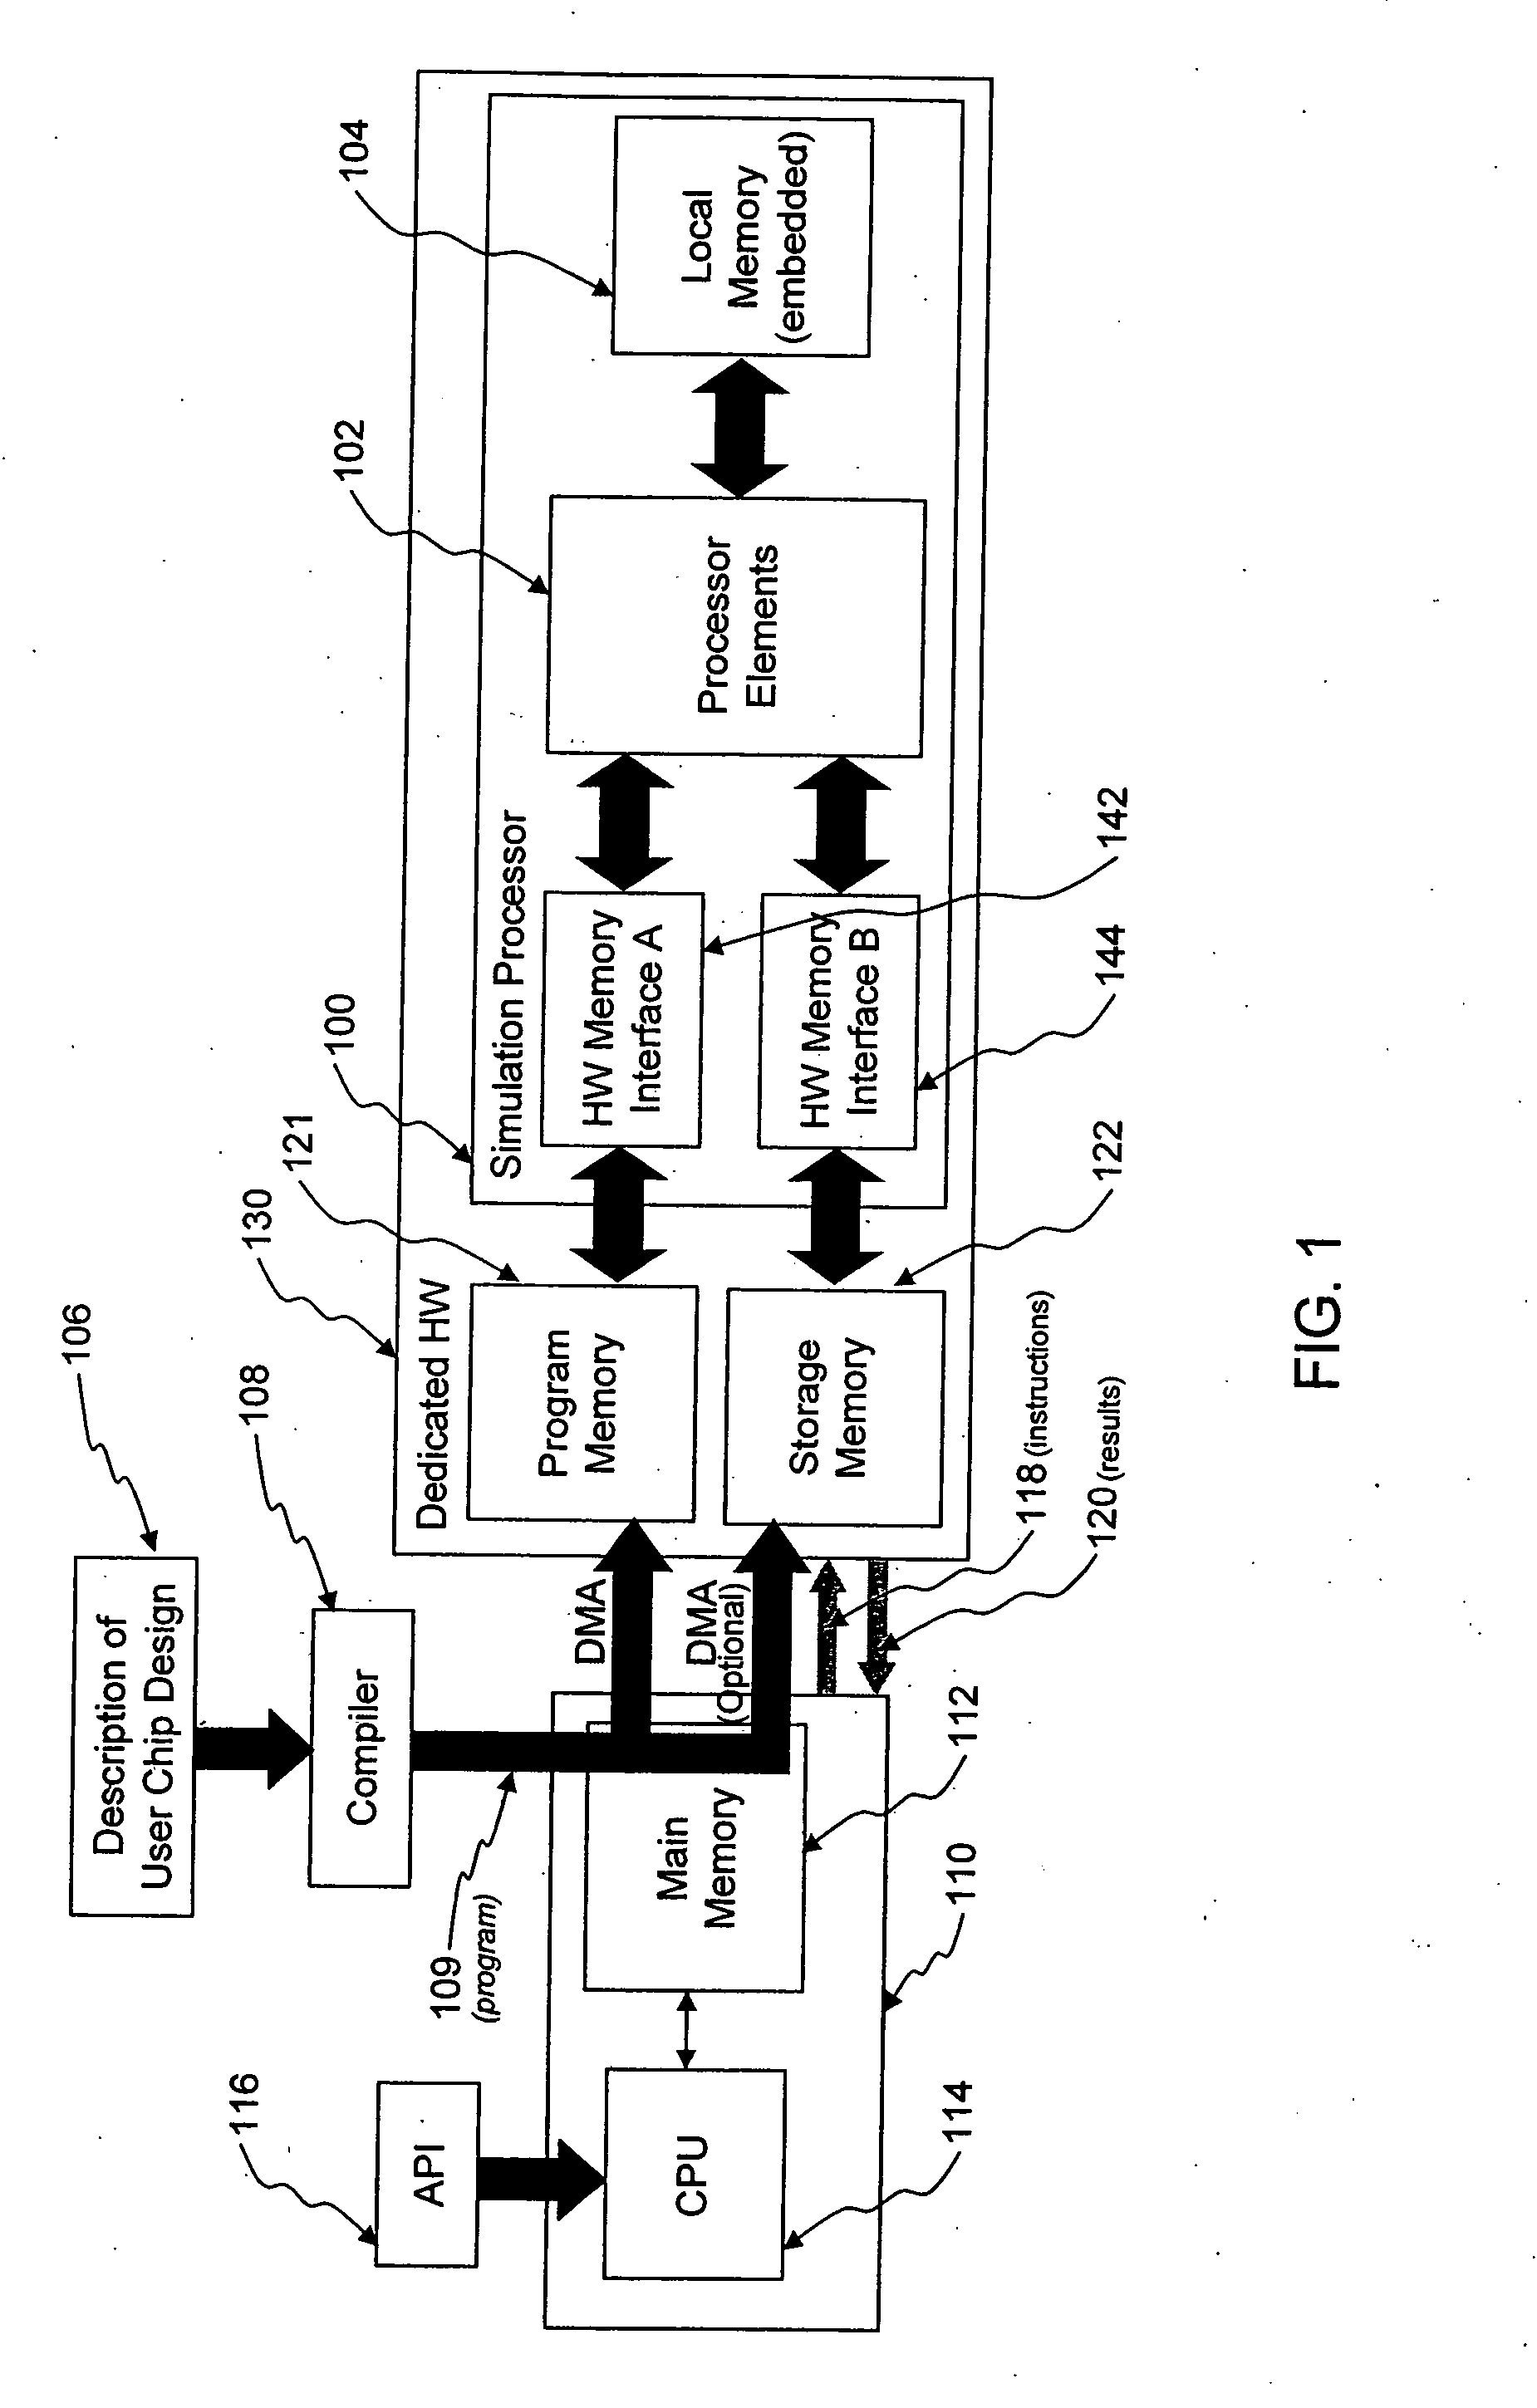 Hardware acceleration system for simulation of logic and memory